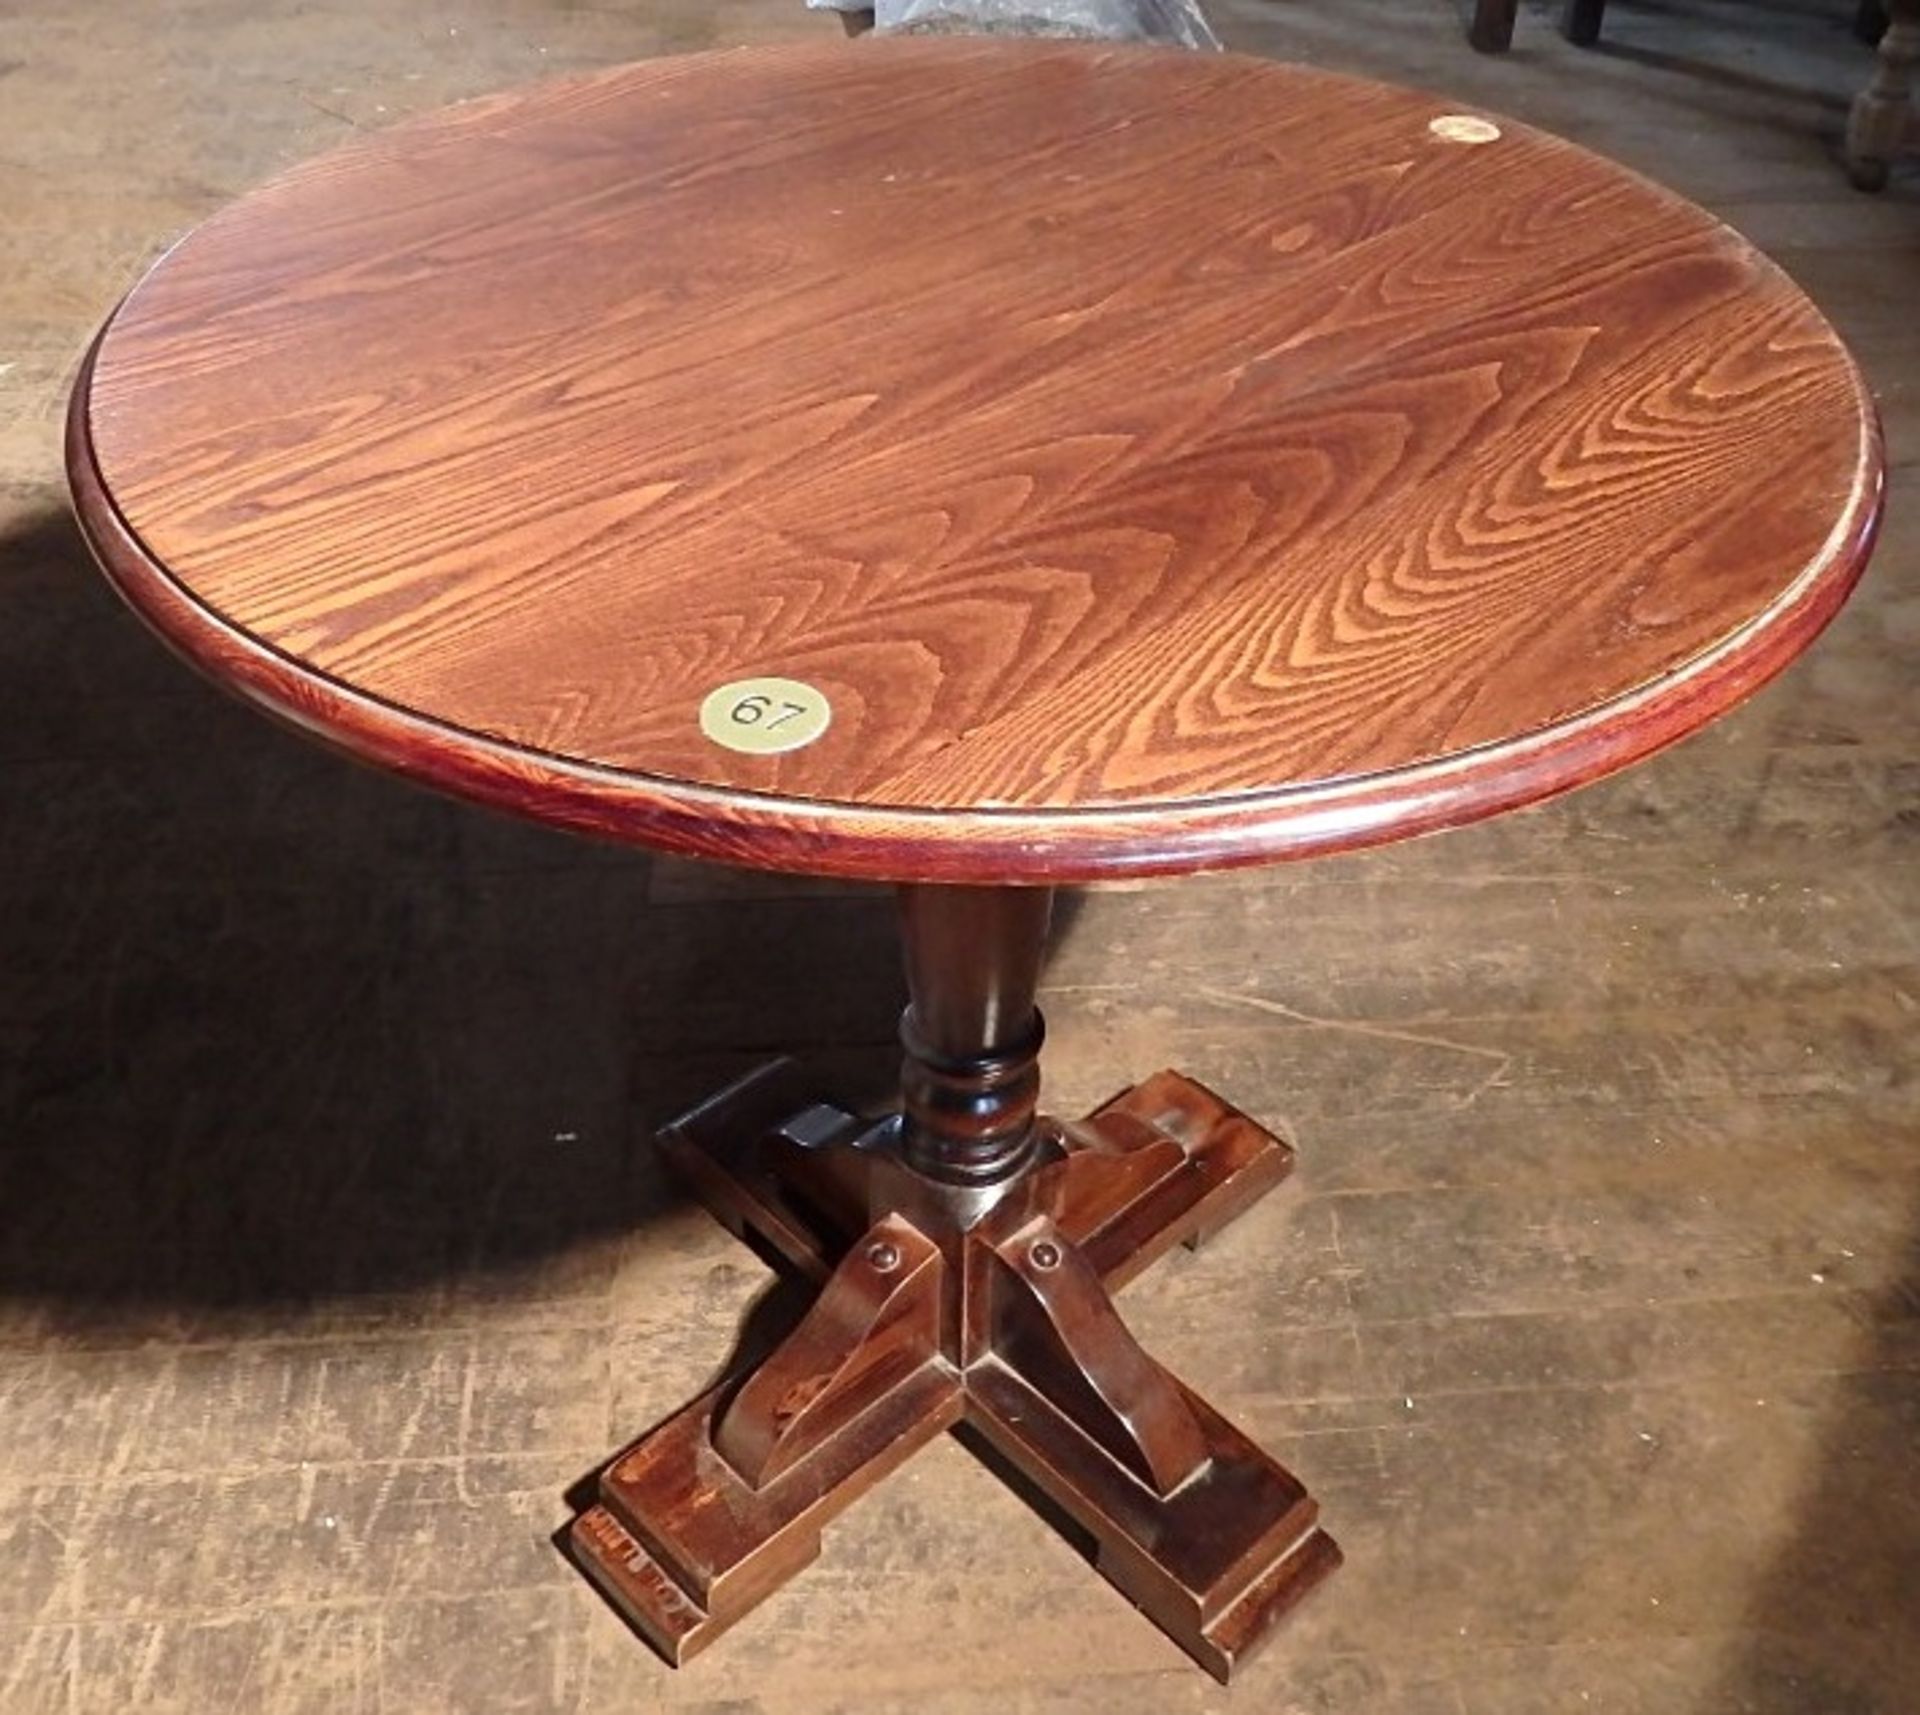 1 x Round Solid Wood Bistro Table - Recently Taken From A Bar & Restaurant Environment - Dimensions: